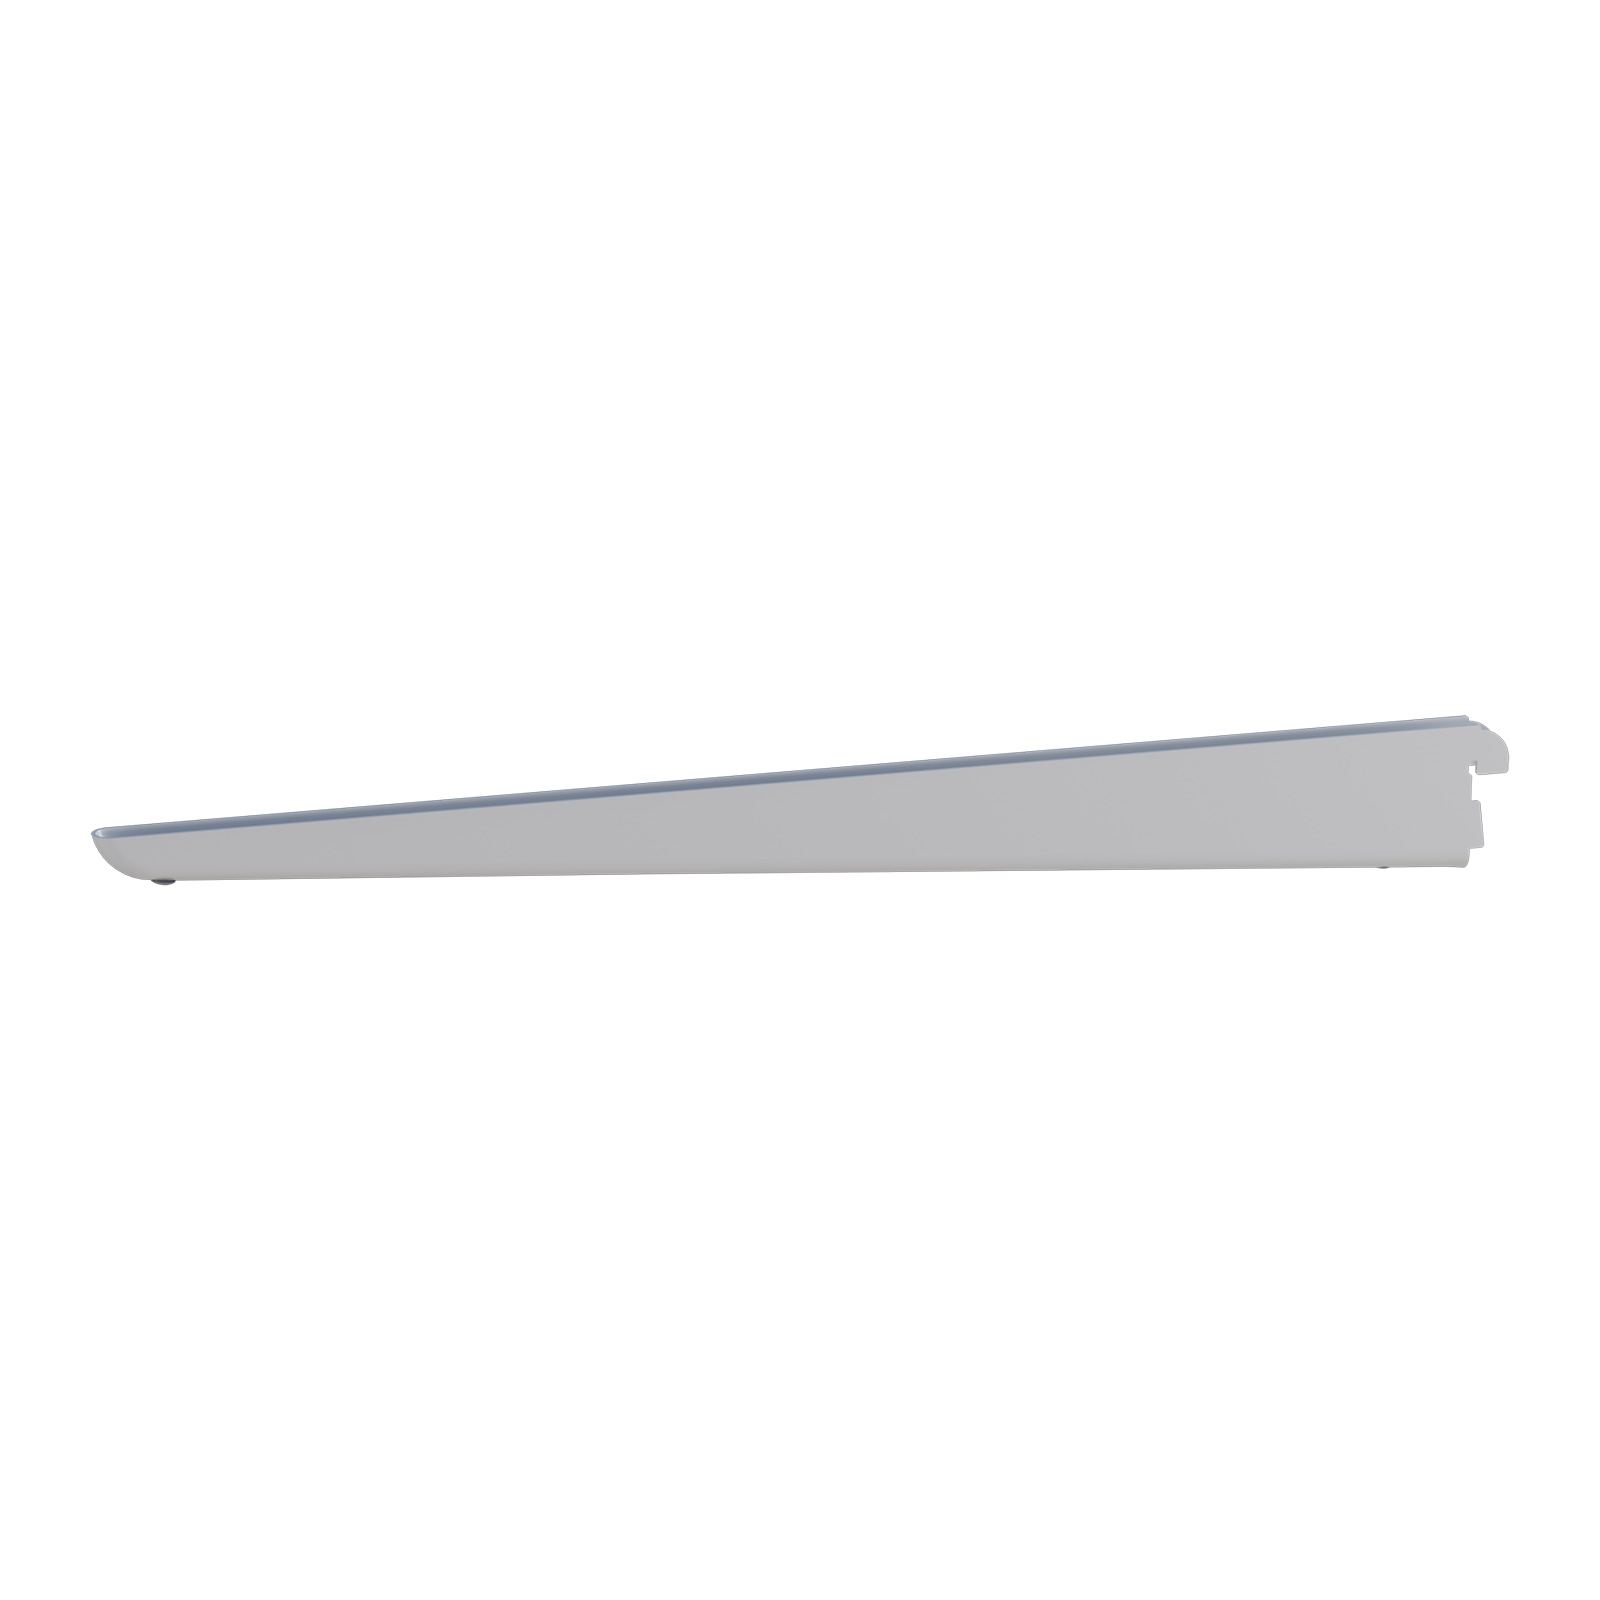 Home Solutions Double Slot Bracket White 470mm